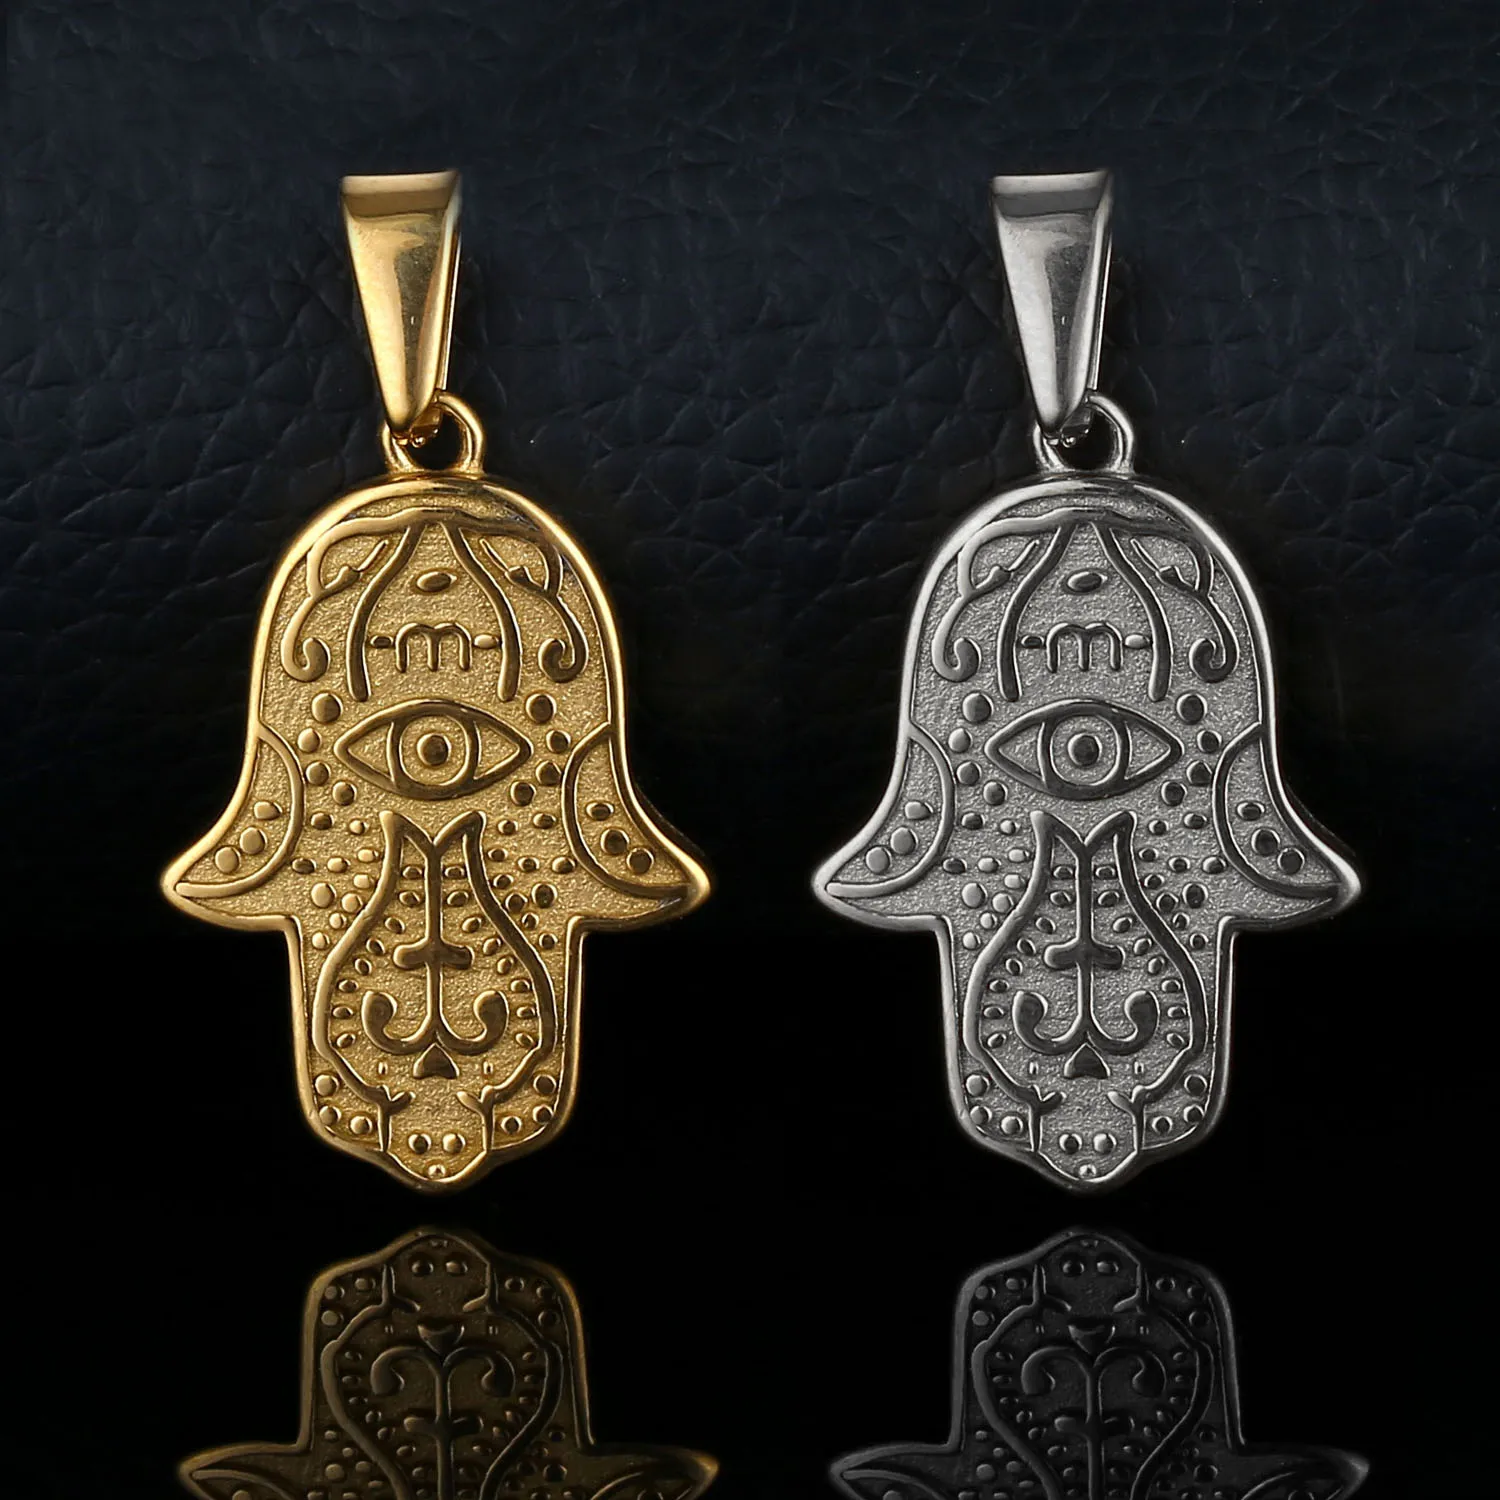 

Vintage Jewelry Gold Necklace For Men Religious Praying Hands Pendant Stainless Steel Waterproof Hamsa Hand Pendant